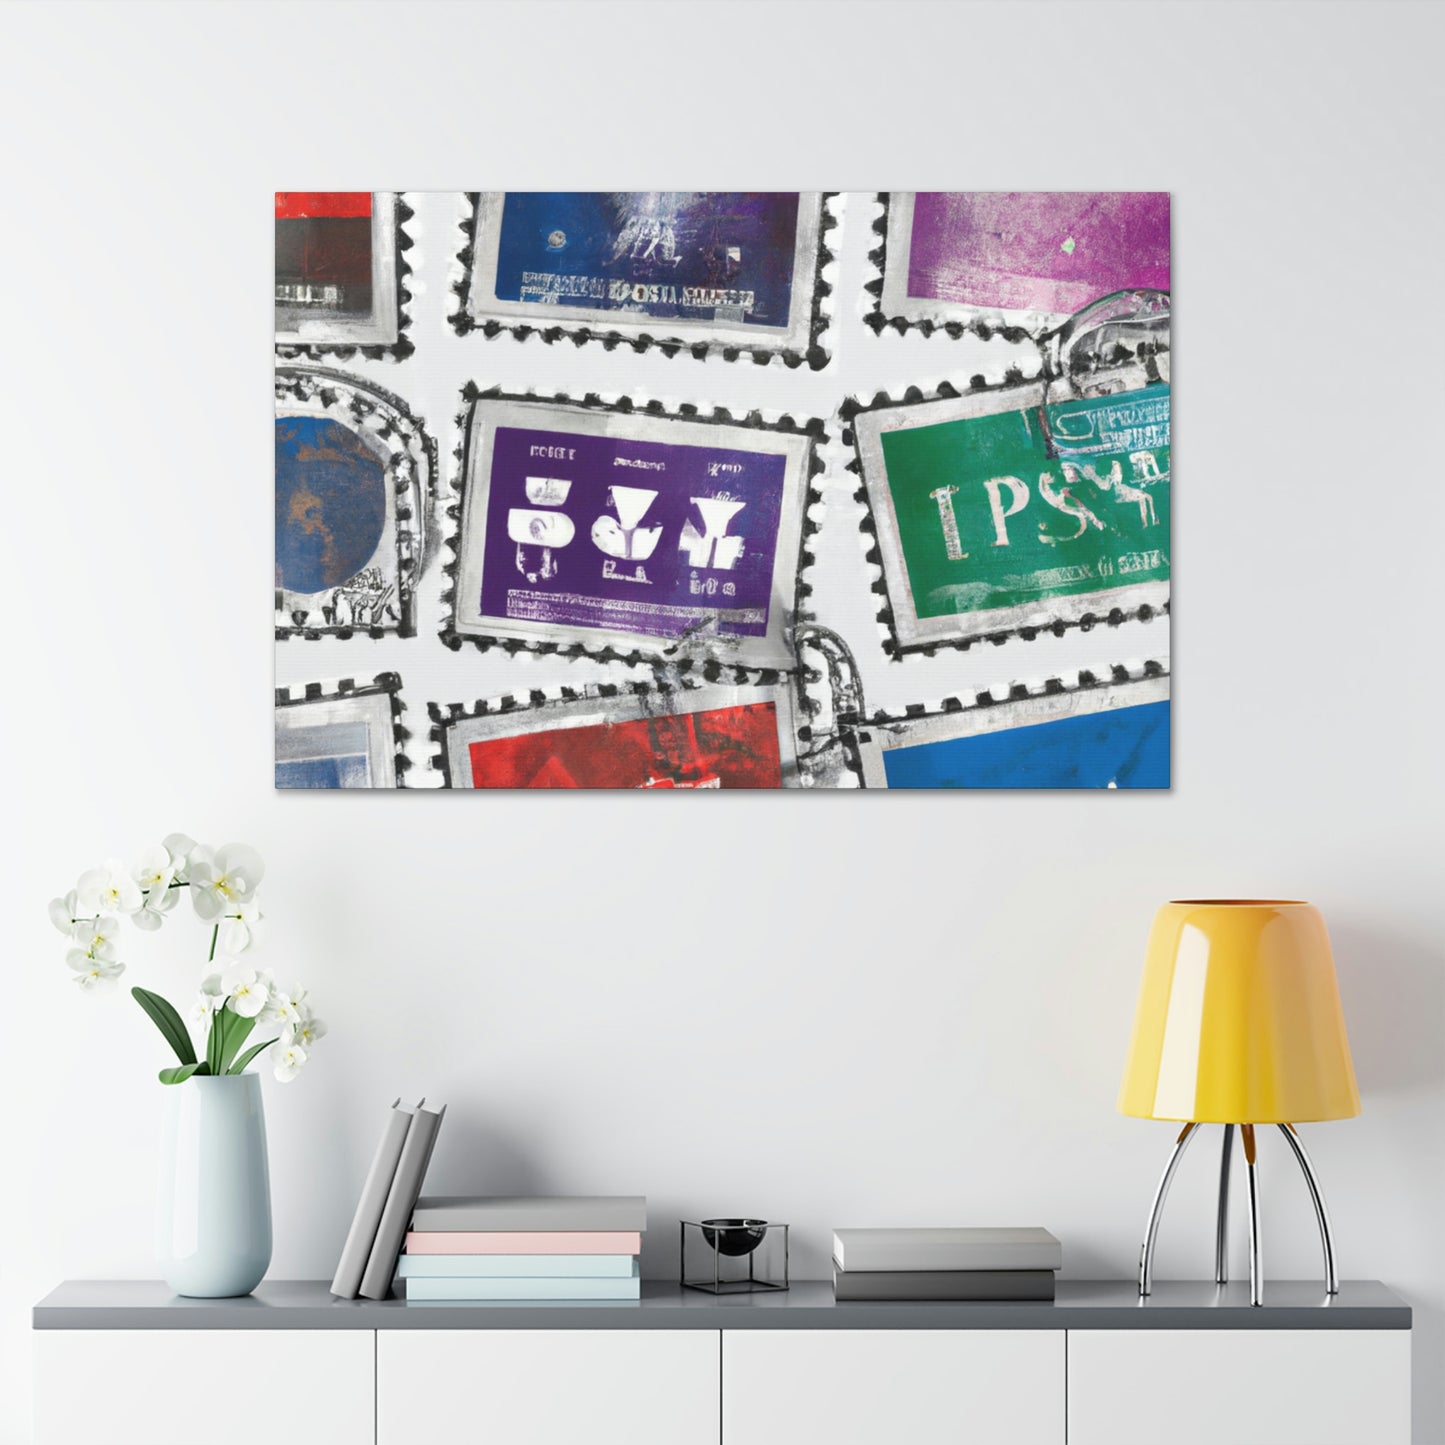 "Global Wonders of the World" - Postage Stamp Collector Canvas Wall Art